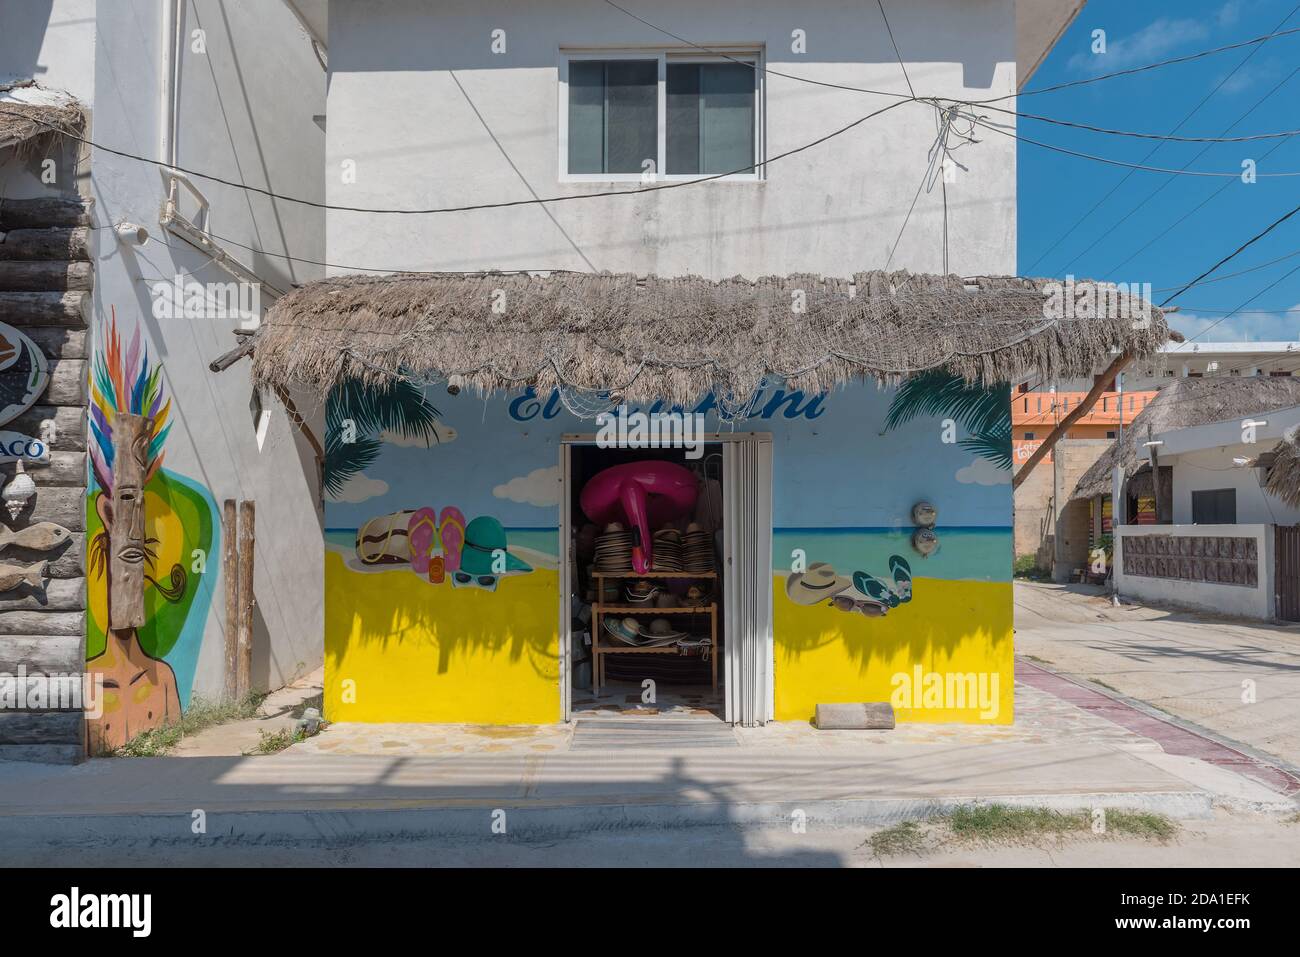 graffiti, street art on a house wall in Holbox village, Mexico Stock Photo